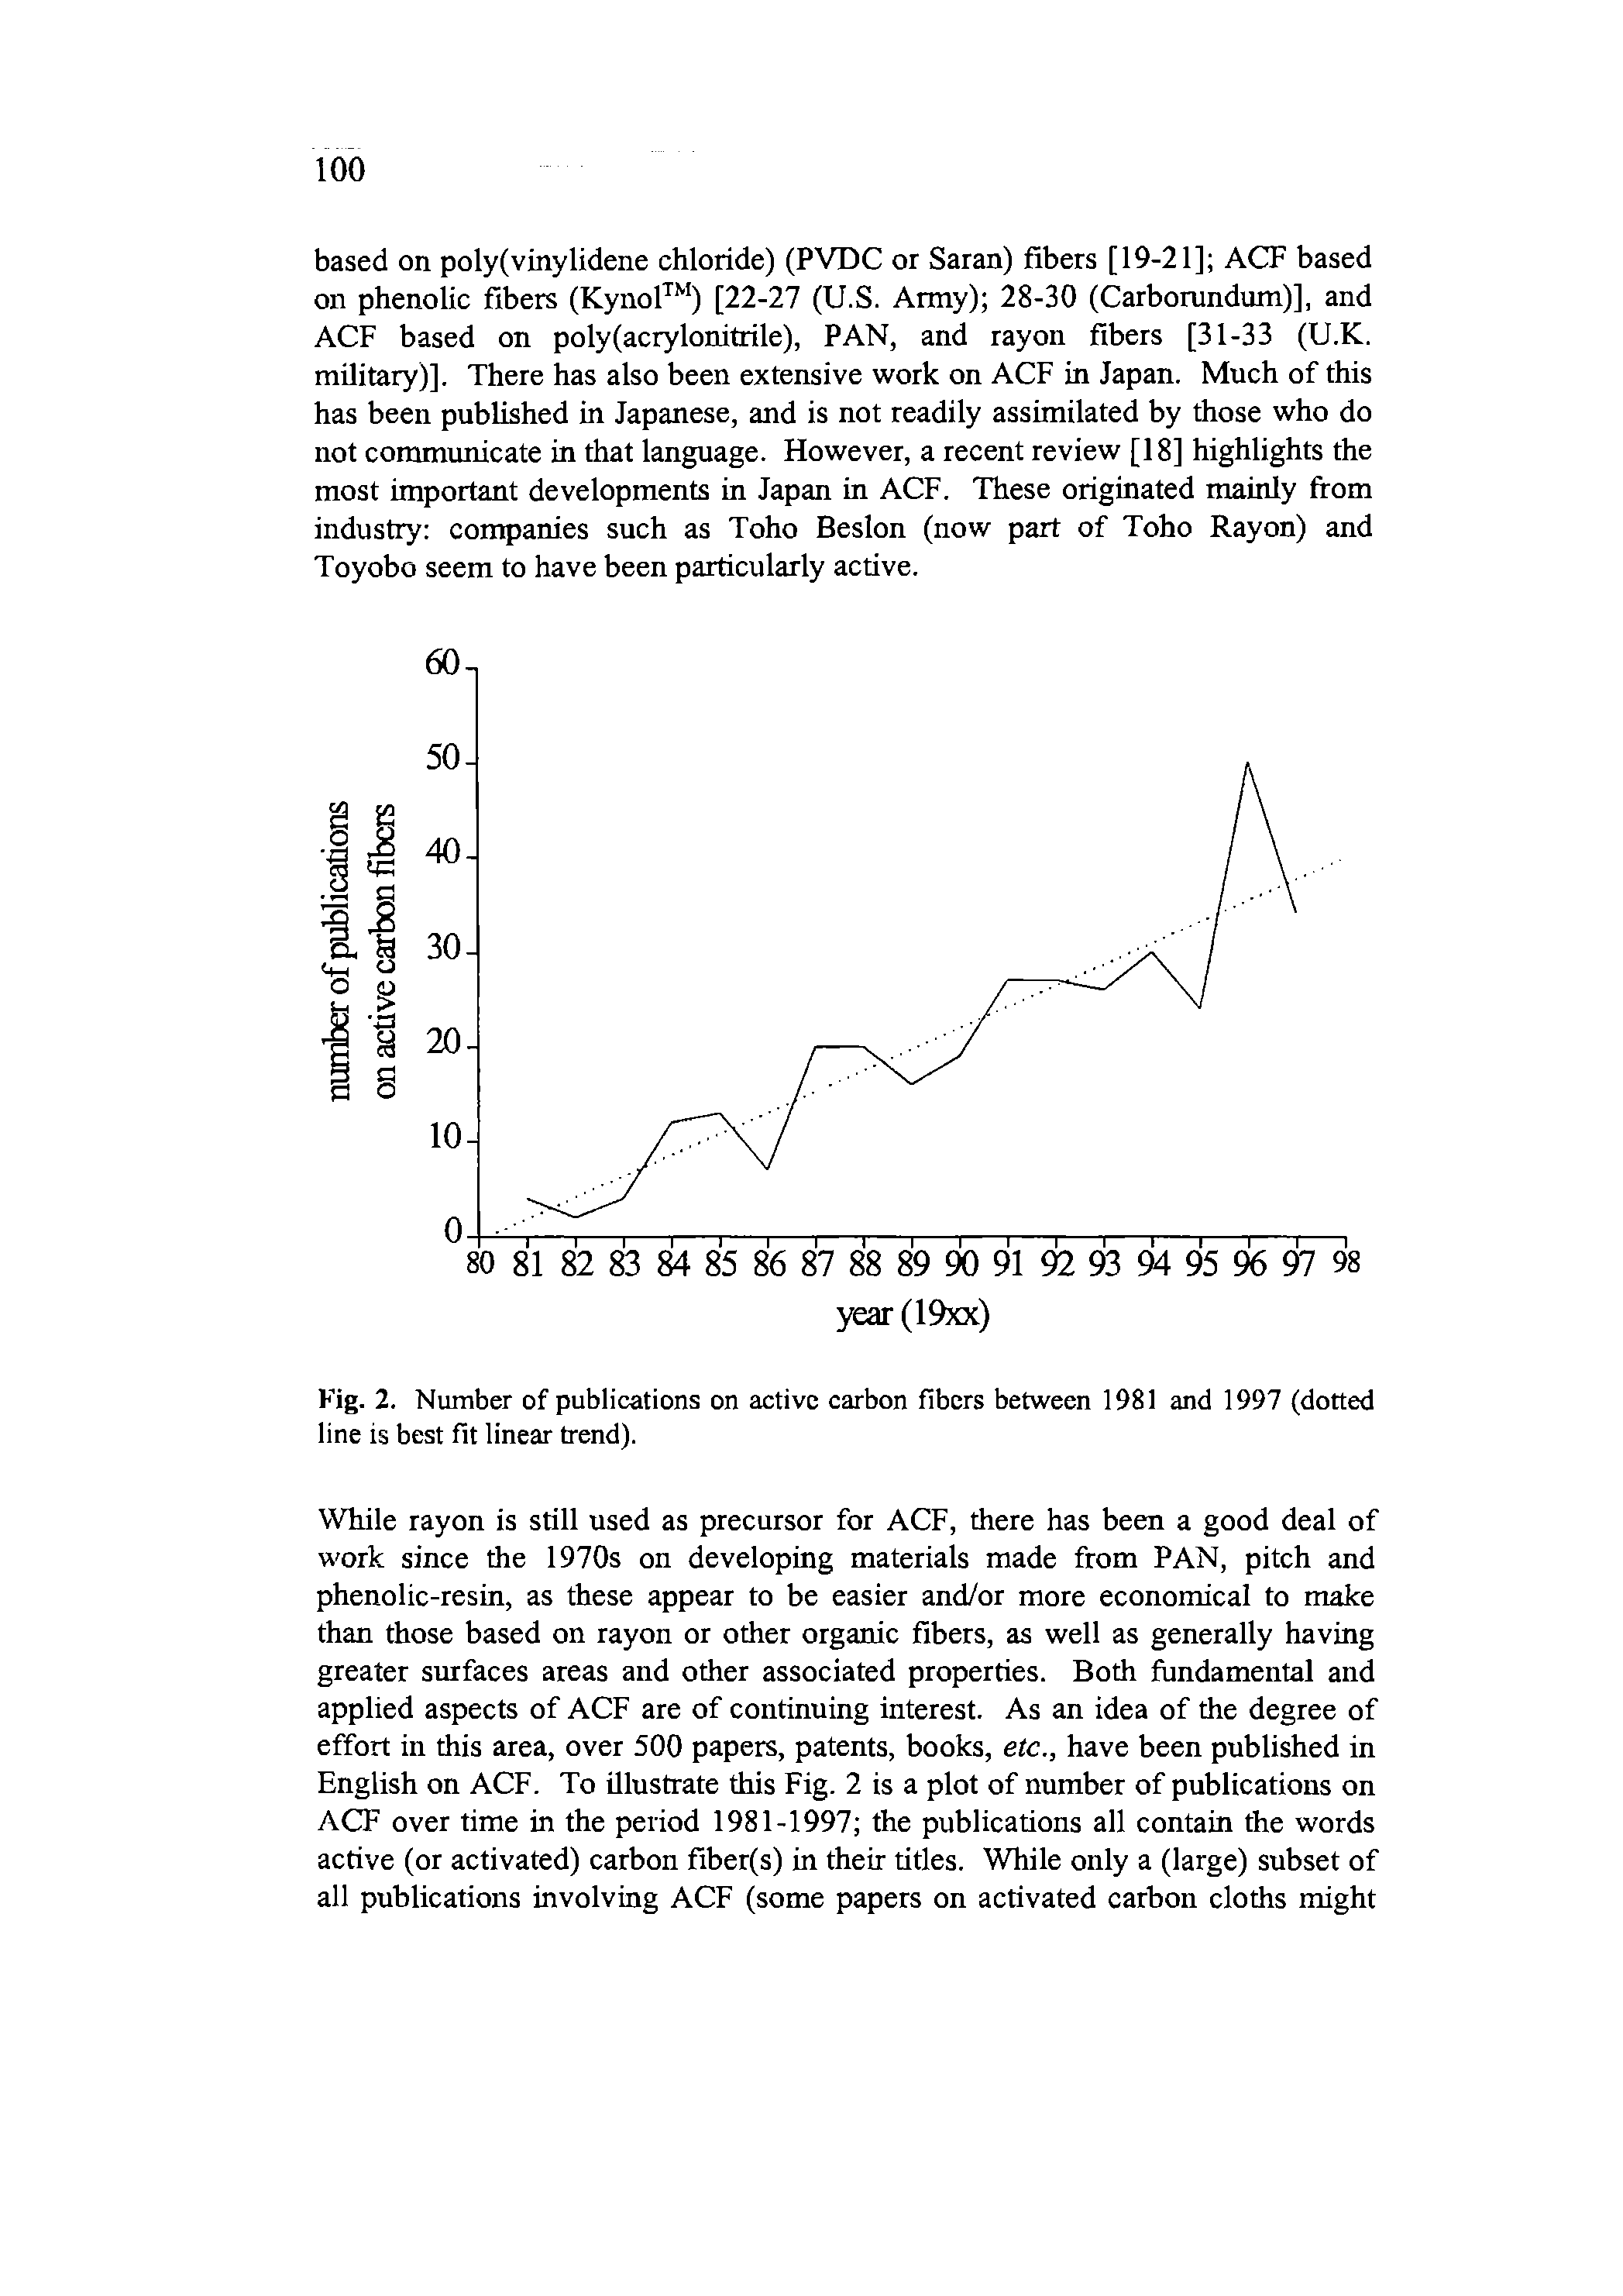 Fig. 2. Number of publications on active carbon fibers between 1981 and 1997 (dotted line is best fit linear trend).